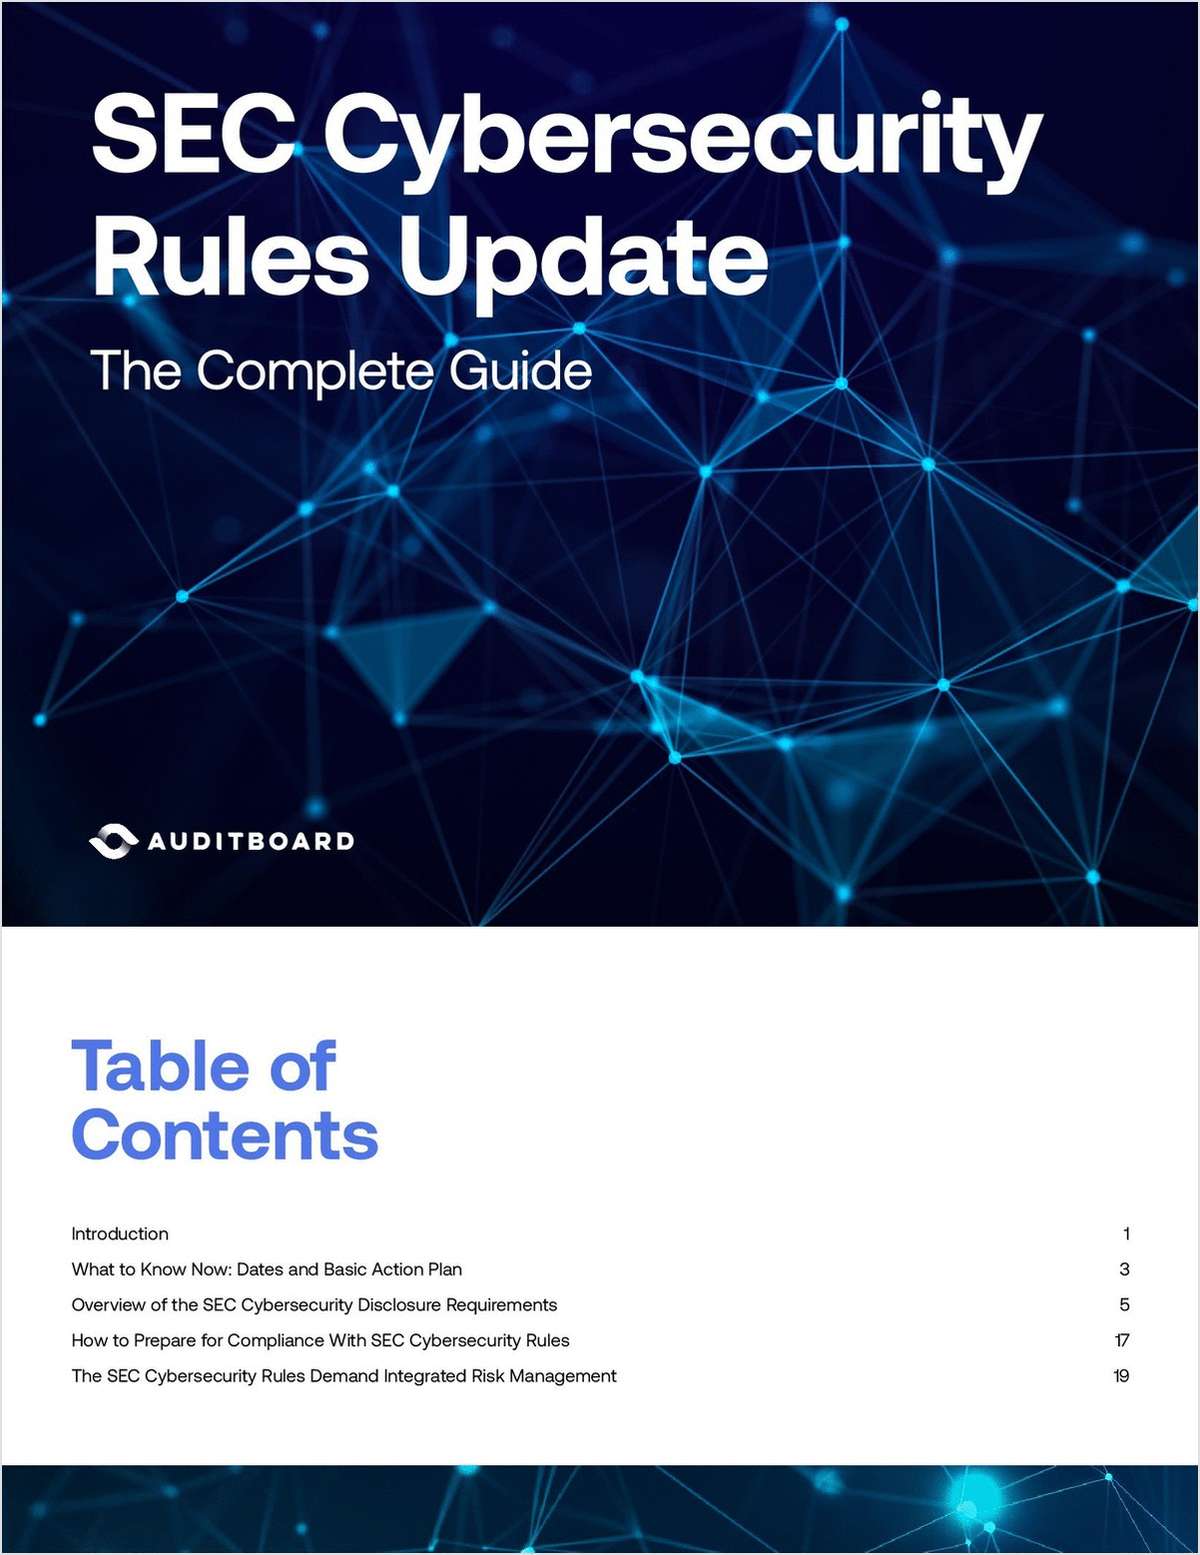 Your Complete Guide to the New SEC Cybersecurity Rules